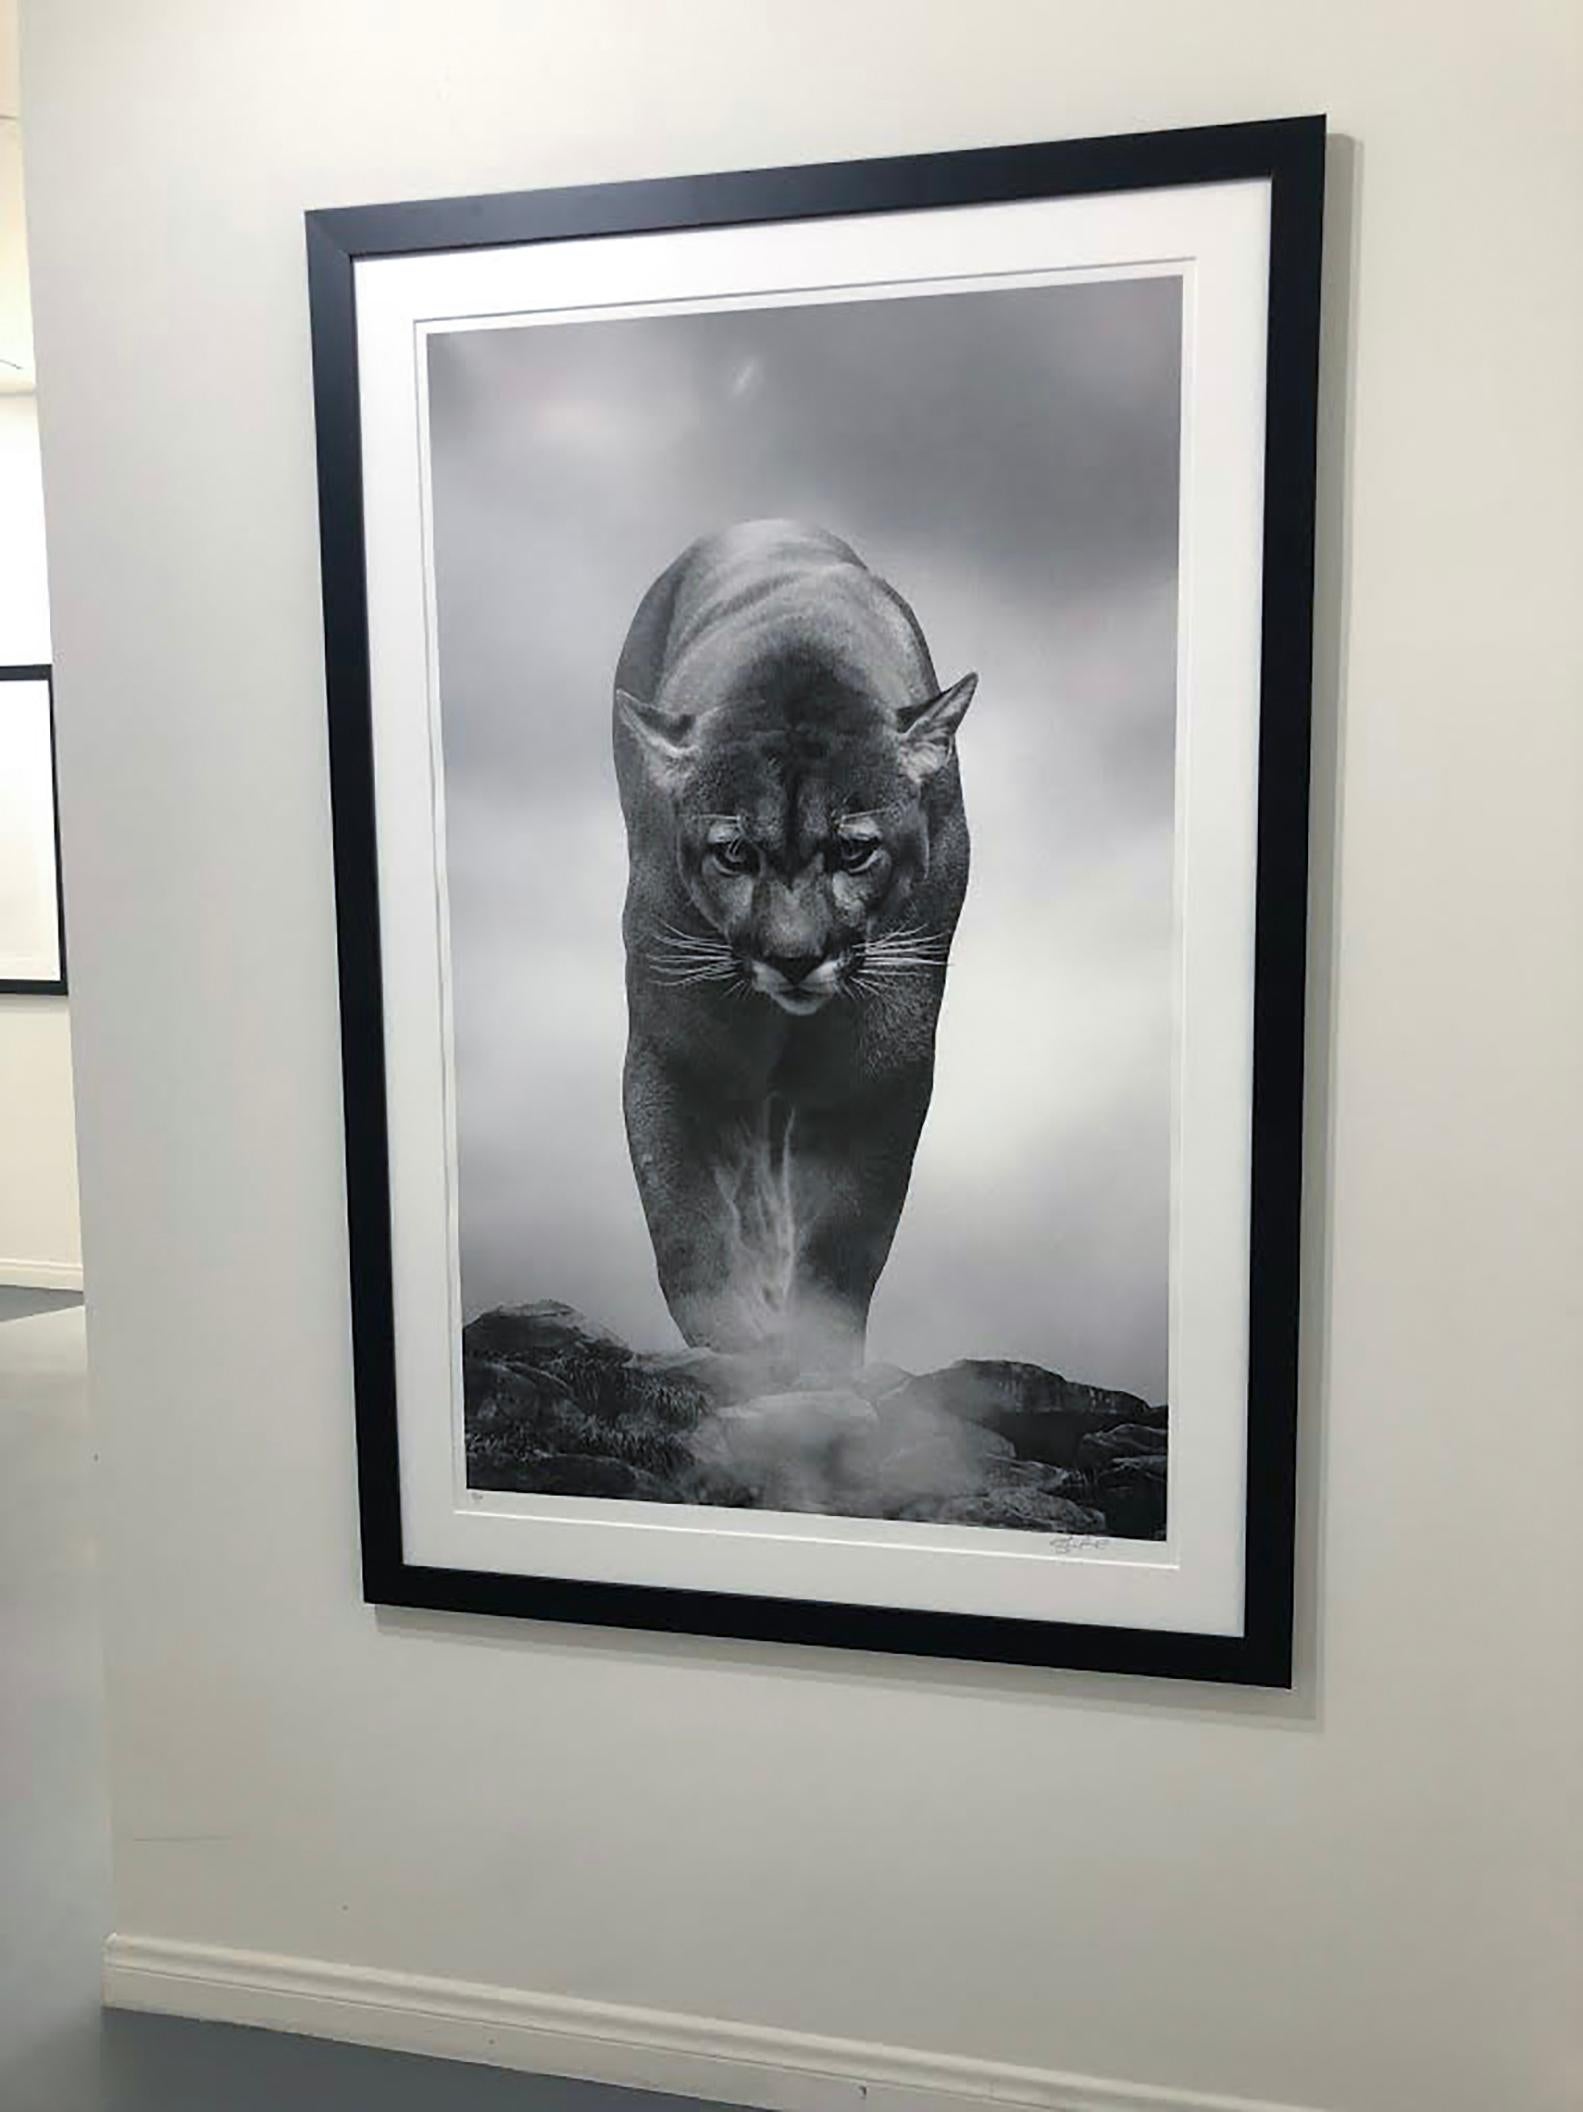 King of the Mountain  36x48 B&W Unsigned Test Print, Cougar, Mountain Lion, Puma - Photograph by Shane Russeck